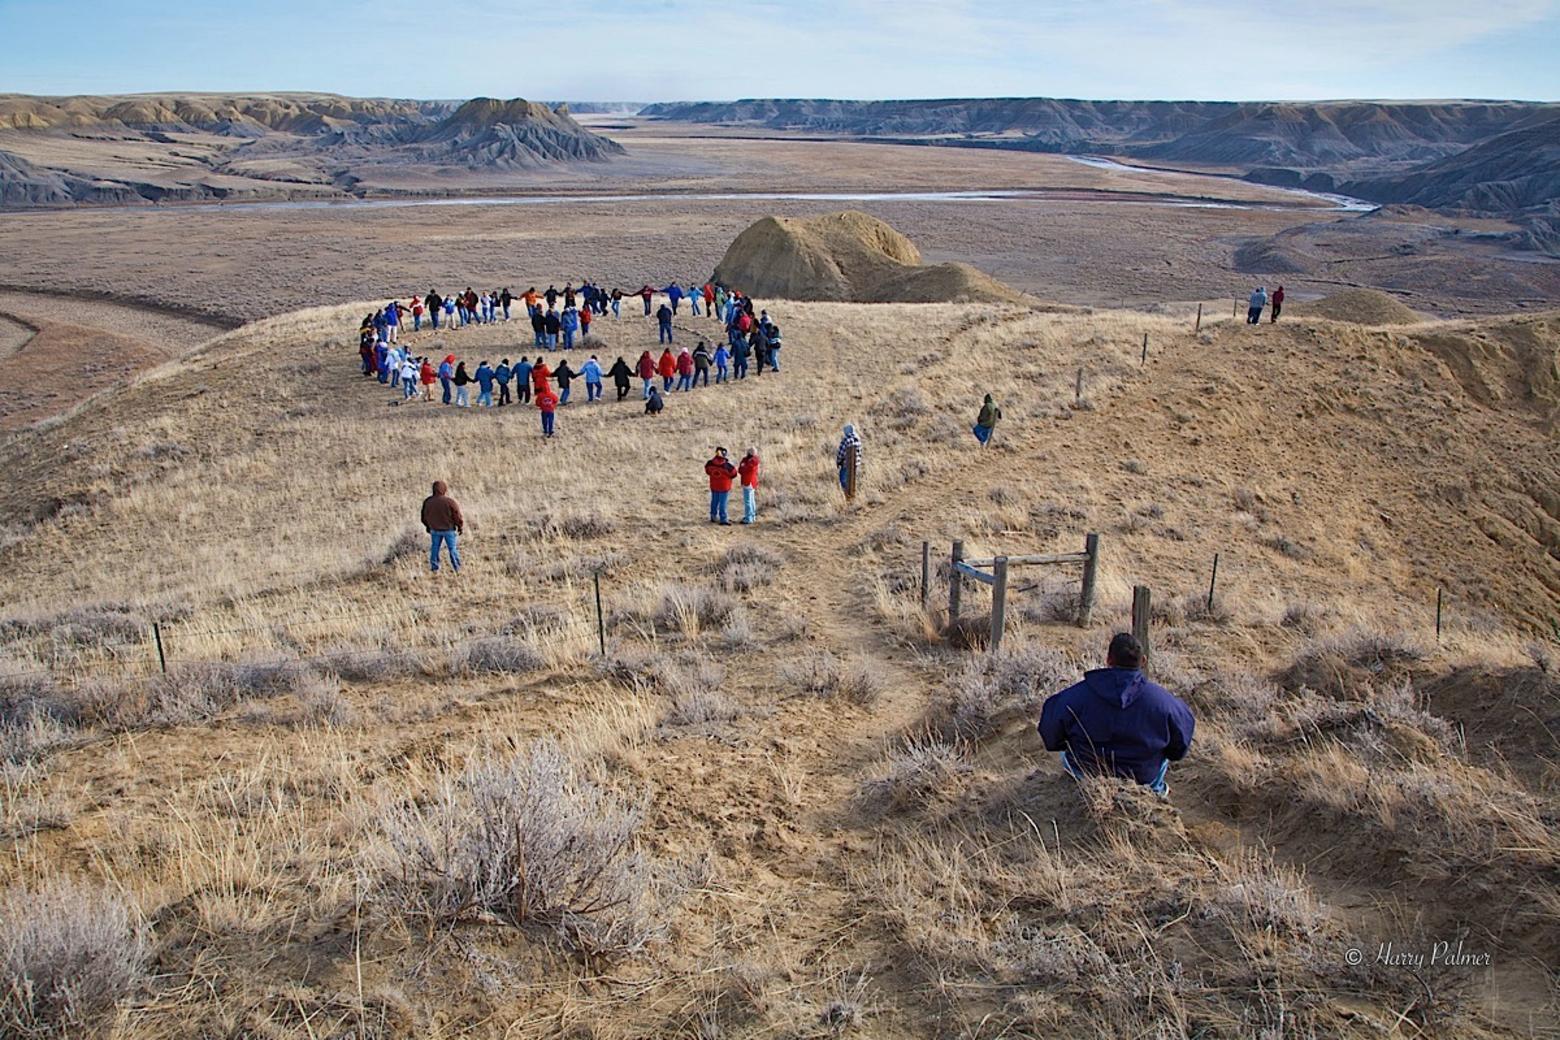 In 2006, members of the Blackfeet Confederacy gather for a round dance at the site of the 1870 Marias Massacre along the Marias River.  Photo courtesy Harry Palmer, licensed via Creative Commons NonCommerical-NoDerivs 3.0.  To see more Harry Palmer's work go to www.aportraitofcanada.ca 